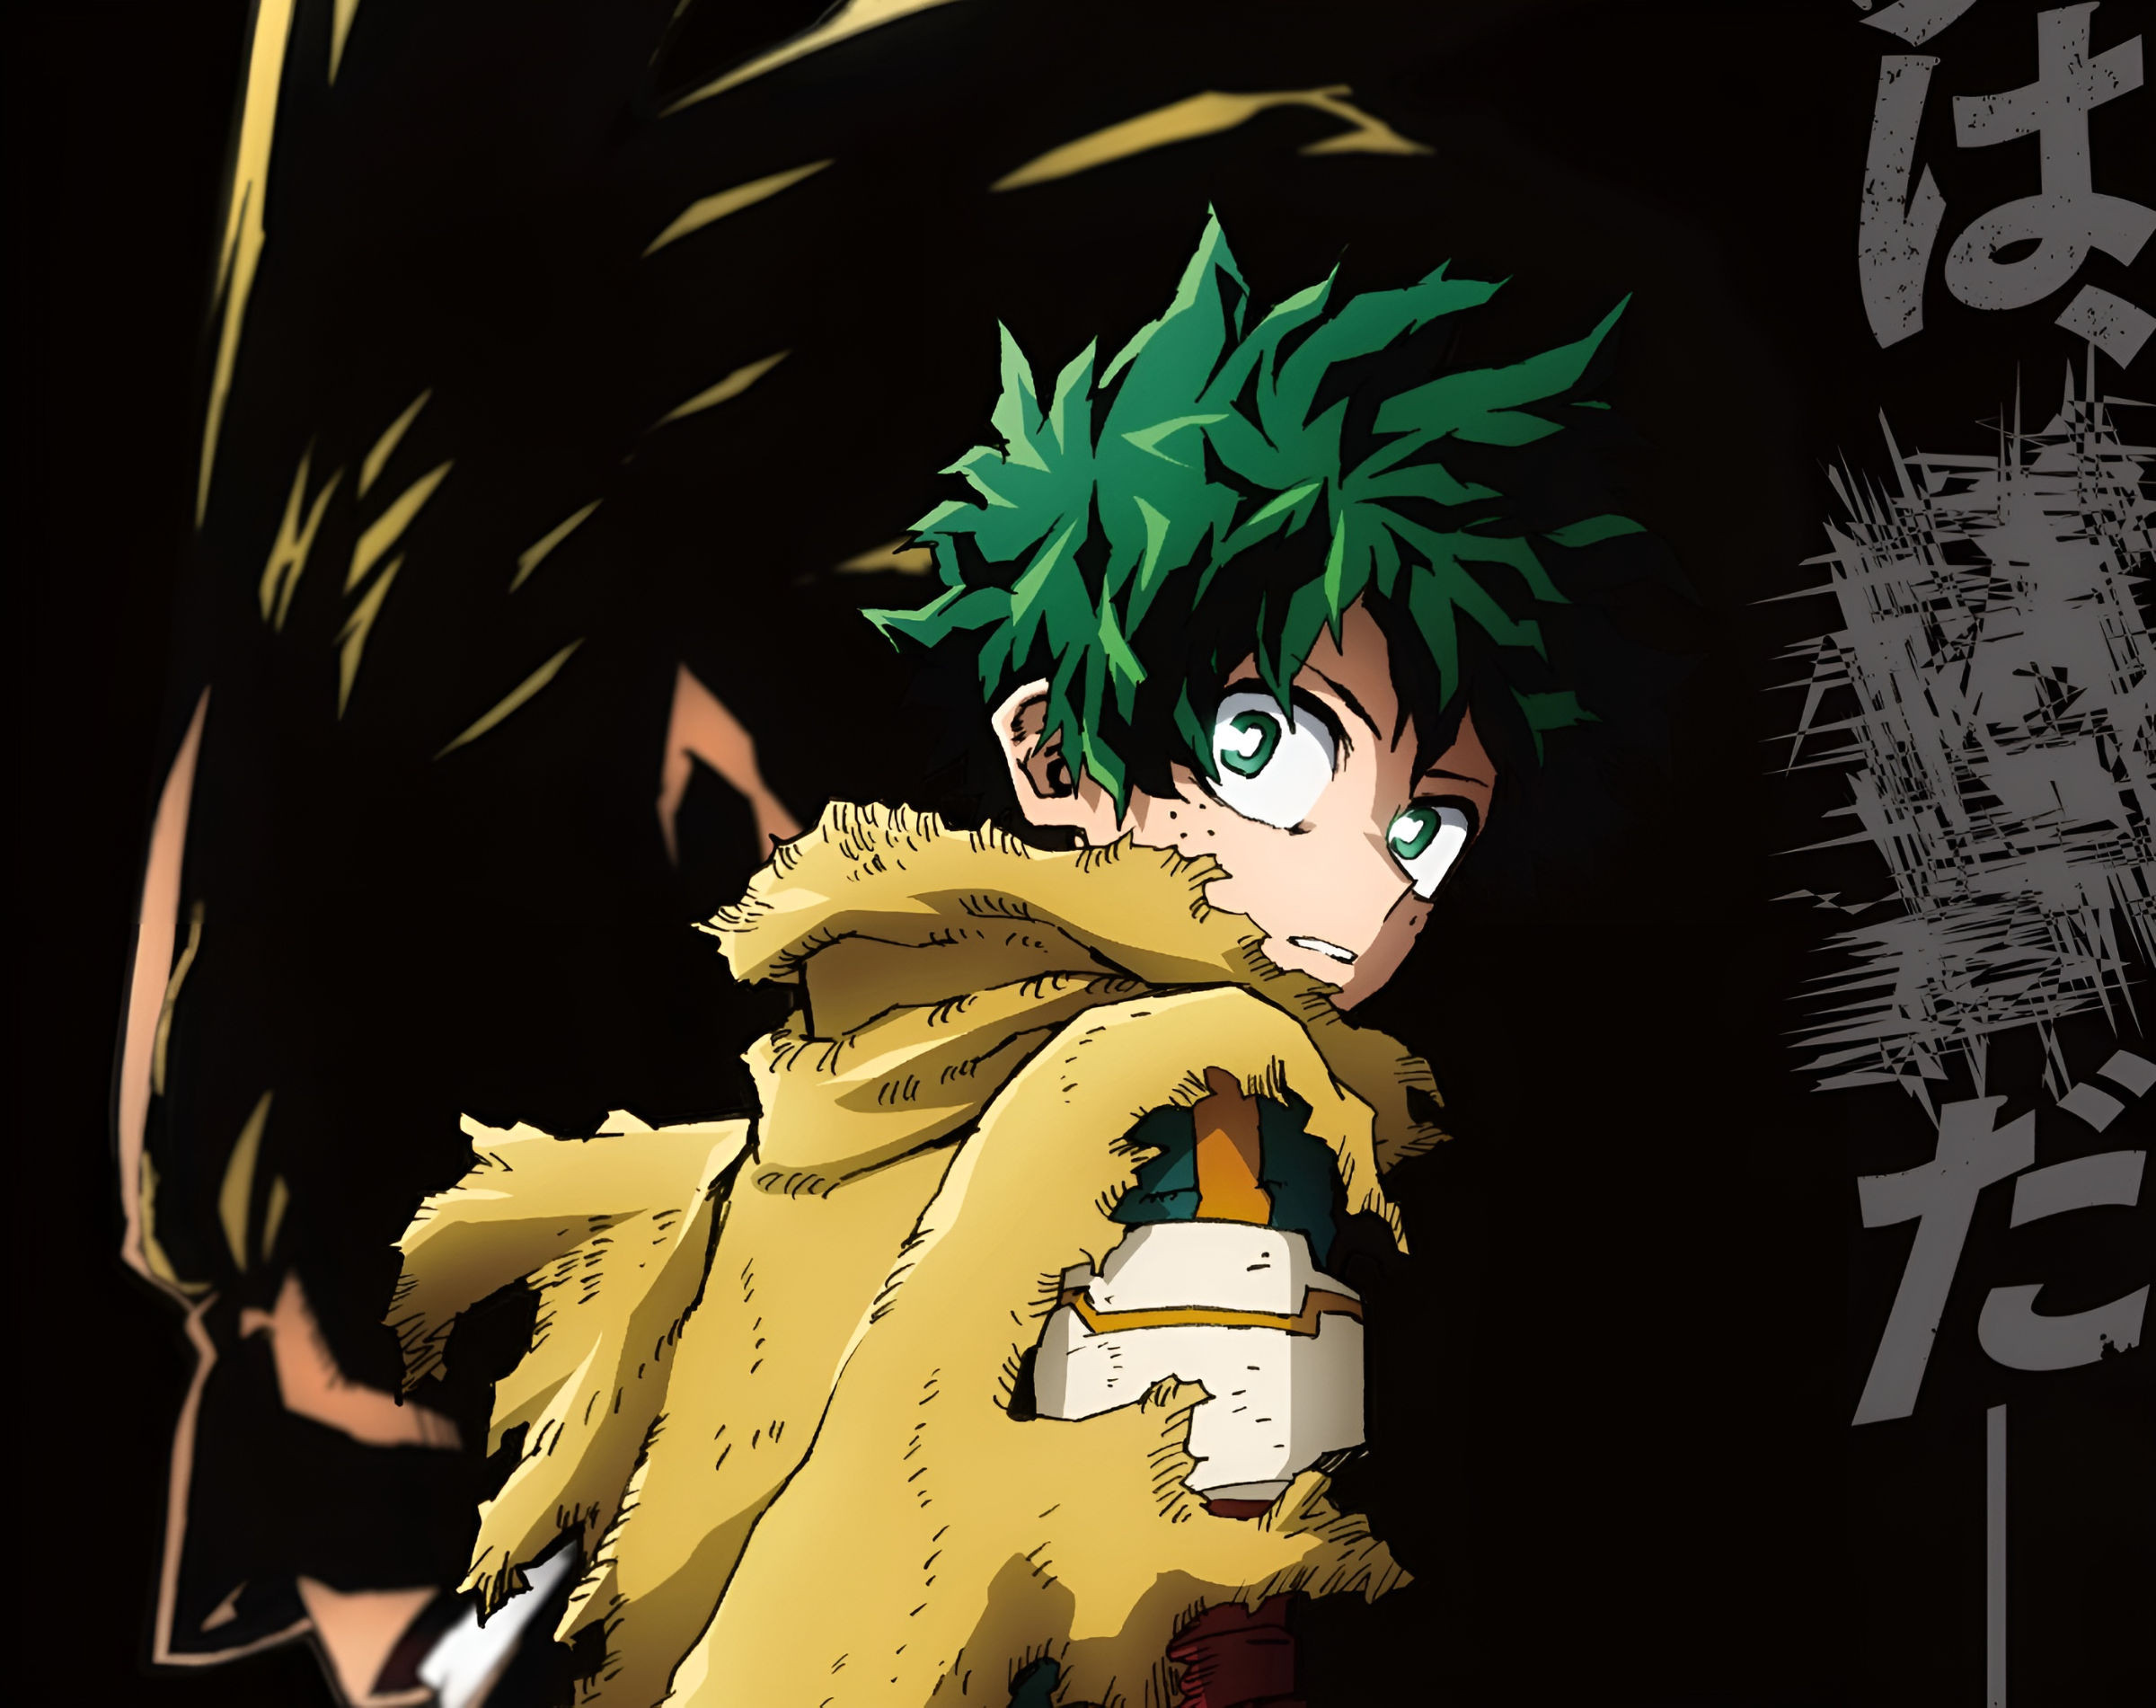 4th My Hero Academia Movie To Premiere in Summer 2024